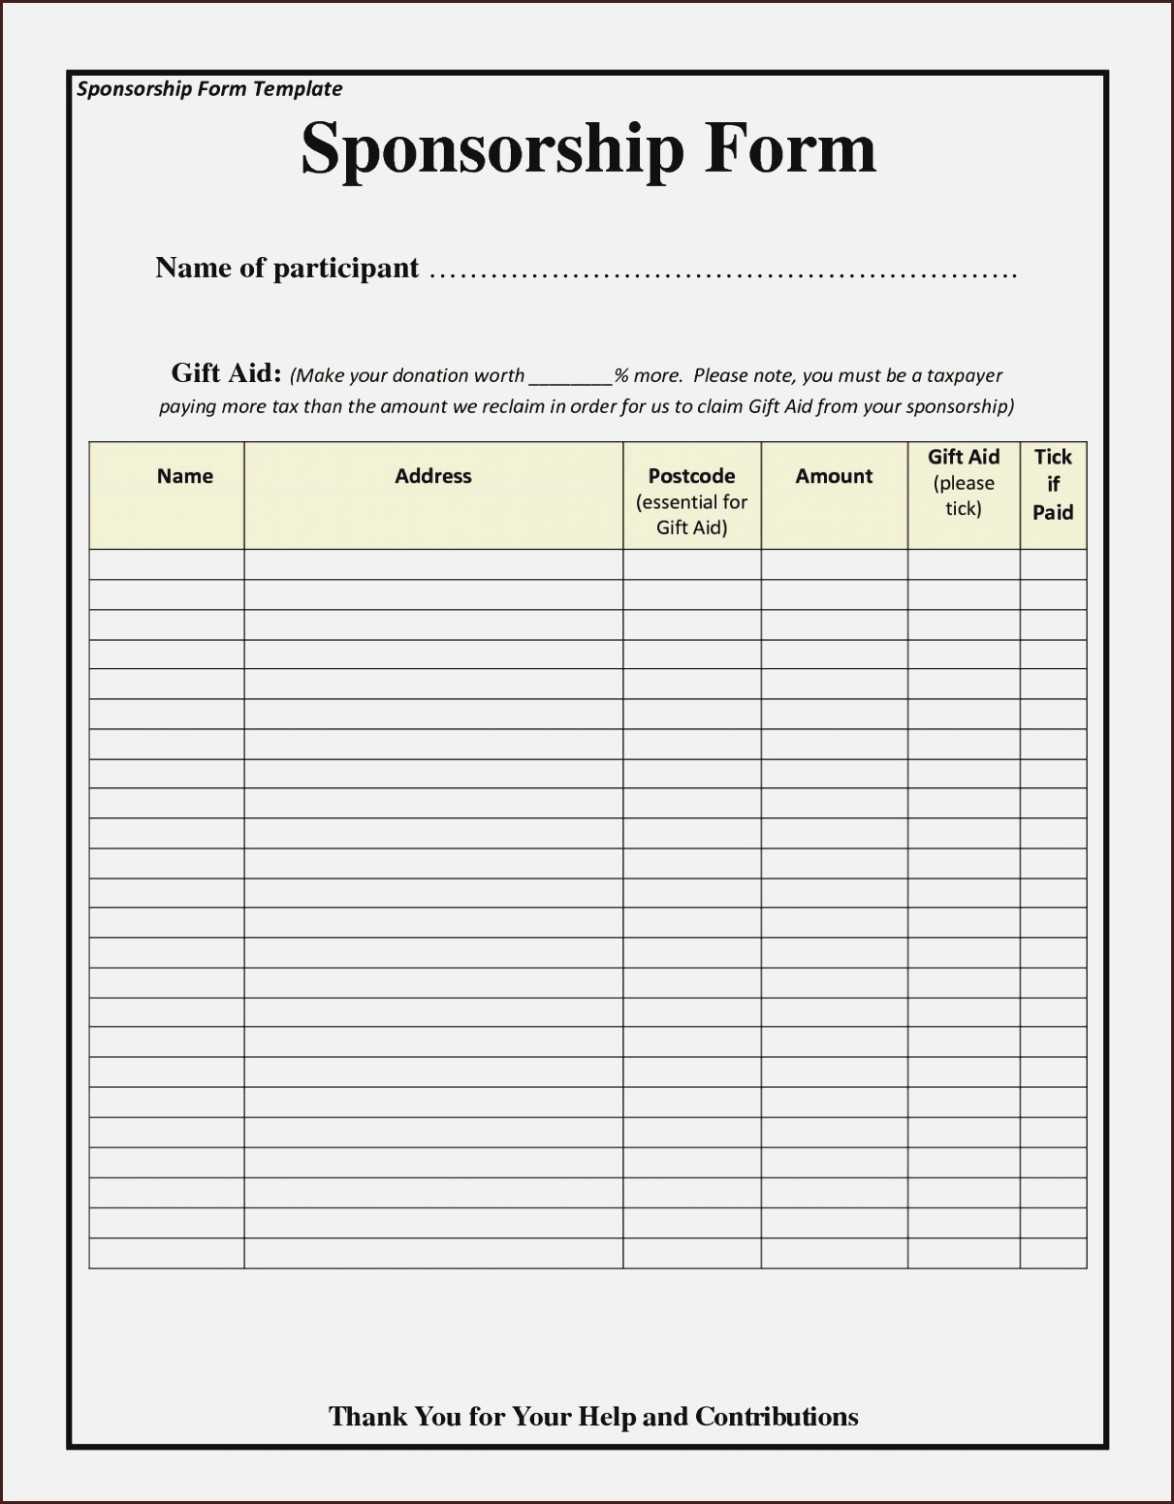 The Death Of Sponsorship | Realty Executives Mi : Invoice Throughout Blank Sponsorship Form Template